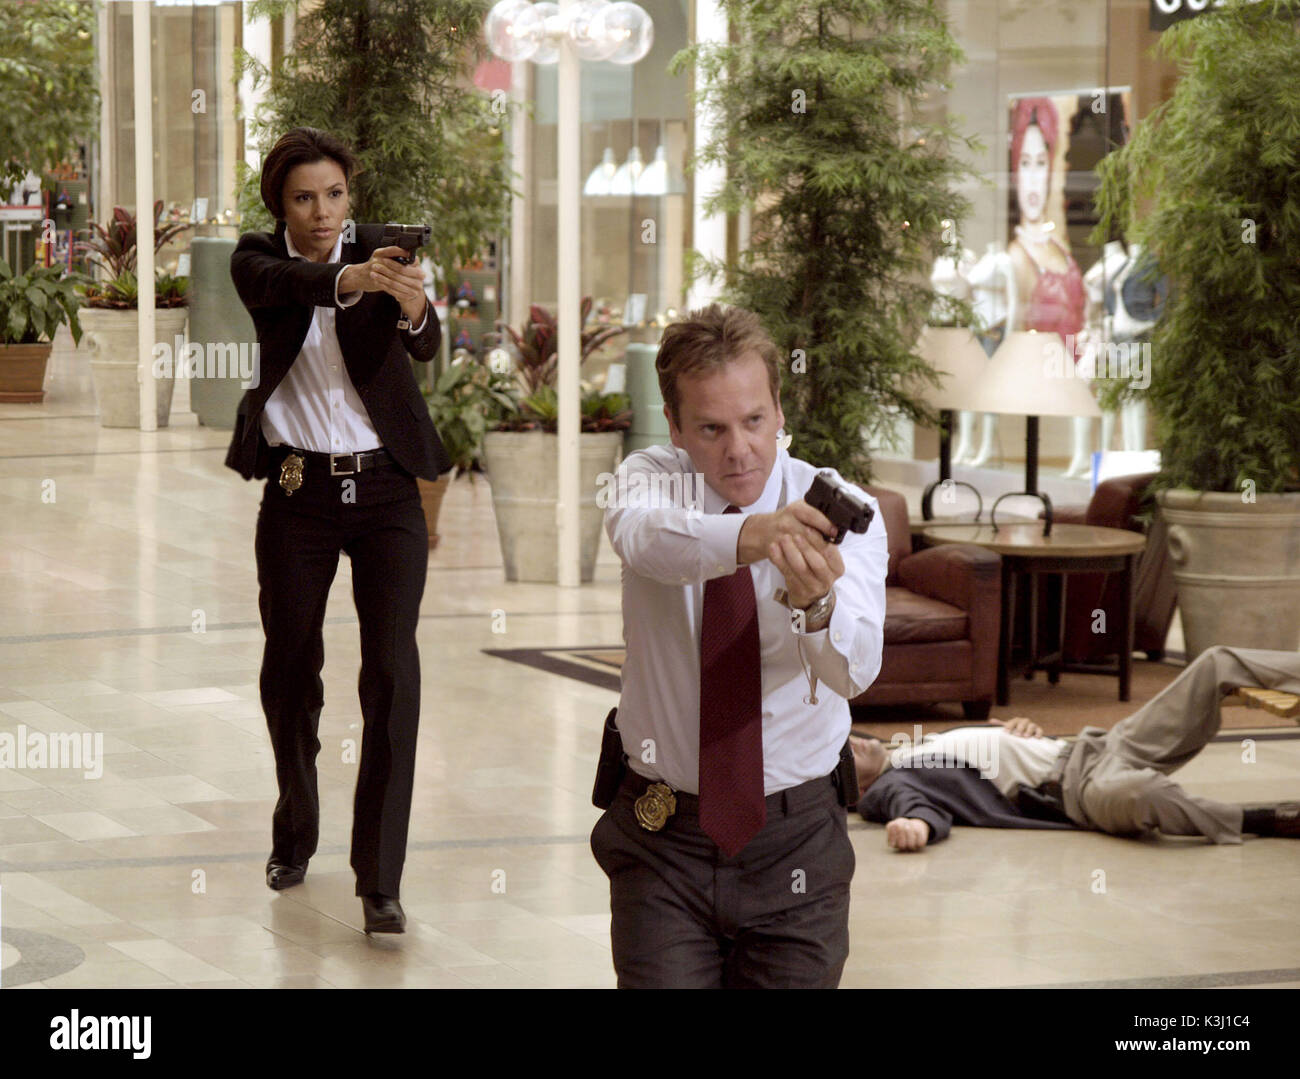 Secret Service Agents Jill Marin and David Breckinridge (Kiefer Sutherland) pursue an assassin. PHOTOGRAPHS TO BE USED SOLELY FOR ADVERTISING, PROMOTION, PUBLICITY OR REVIEWS OF THIS SPECIFIC MOTION PICTURE AND TO REMAIN THE PROPERTY OF THE STUDIO. NOT FOR SALE OR REDISTRIBUTION. ALL RIGHTS RESERVED. THE SENTINEL EVA LONGORIA, KIEFER SUTHERLAND     Date: 2006 Stock Photo